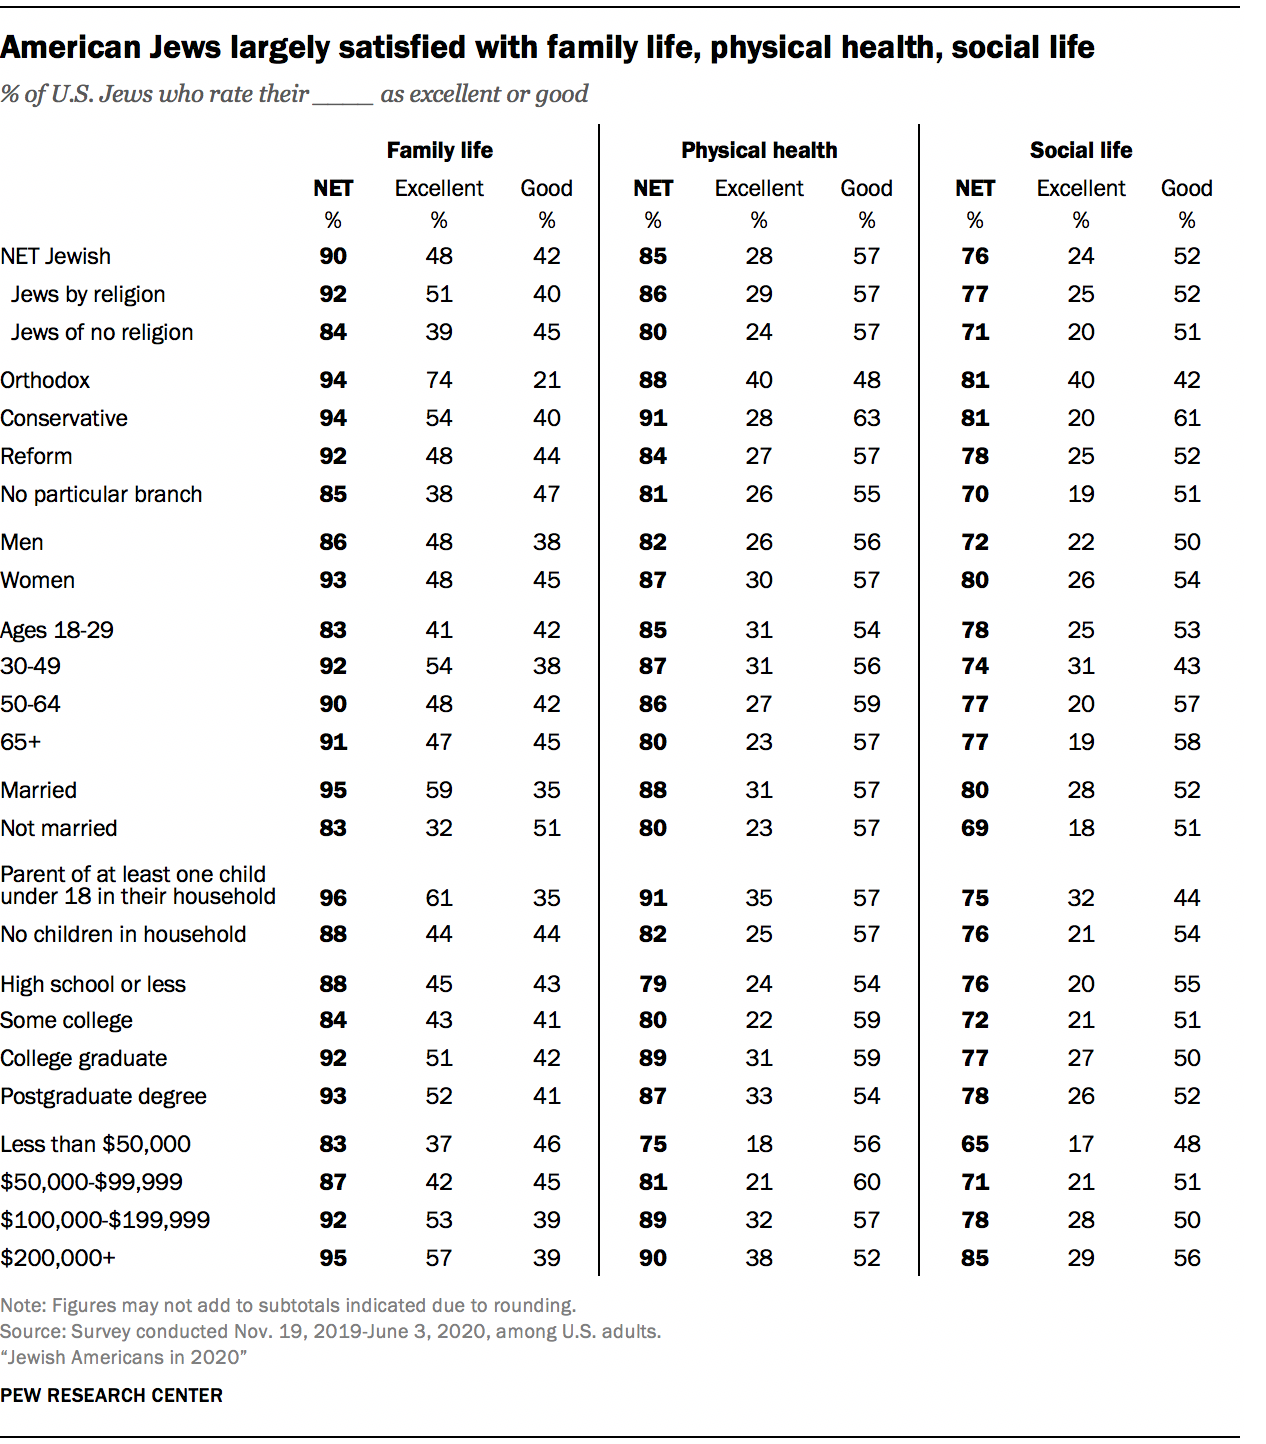 American Jews largely satisfied with family life, physical health, social life